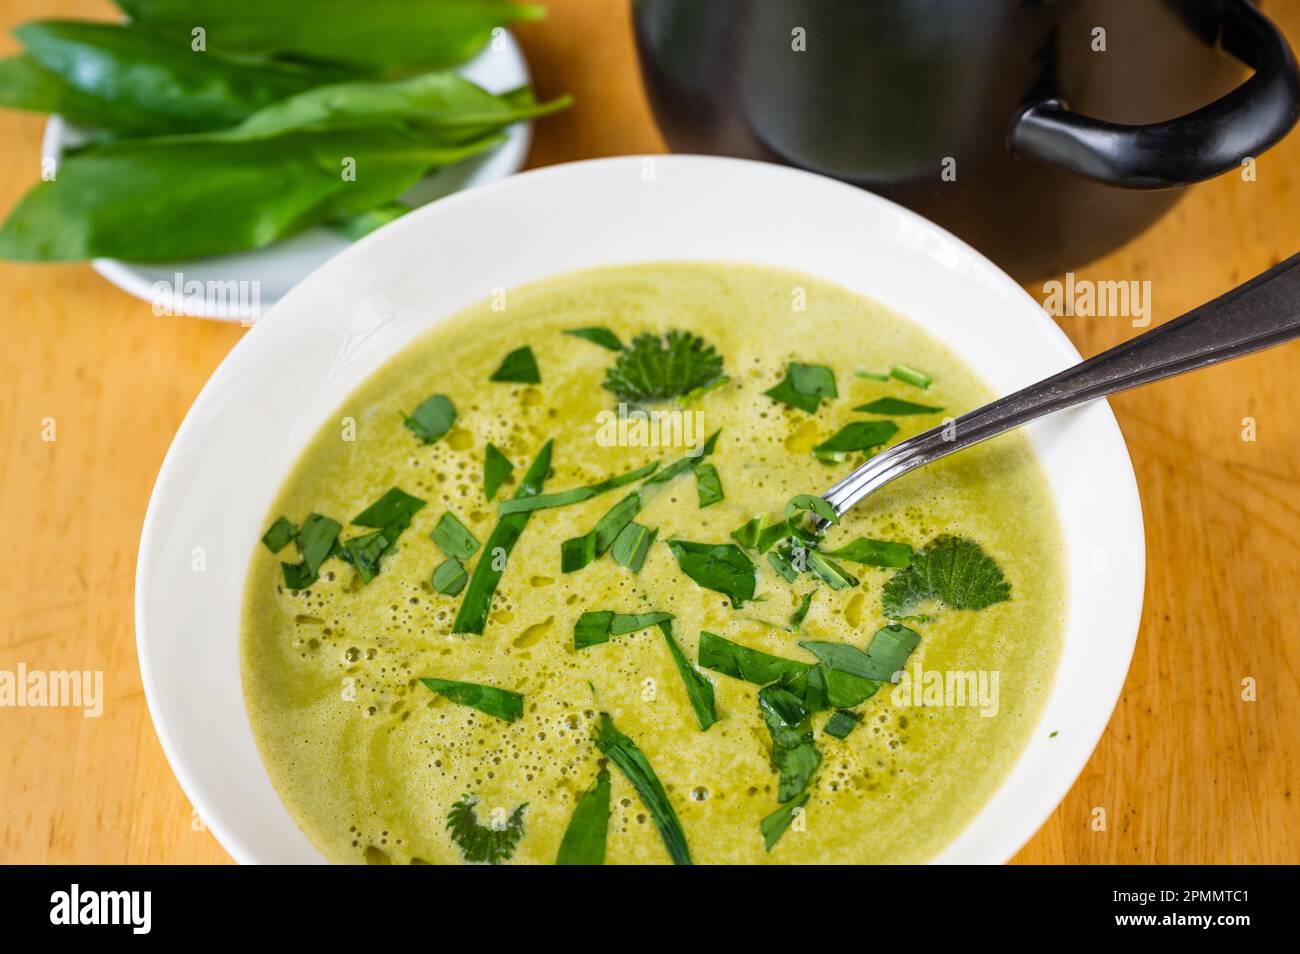 Spring soup from bear garlic and nettle, green leaf, pot on table. Stock Photo